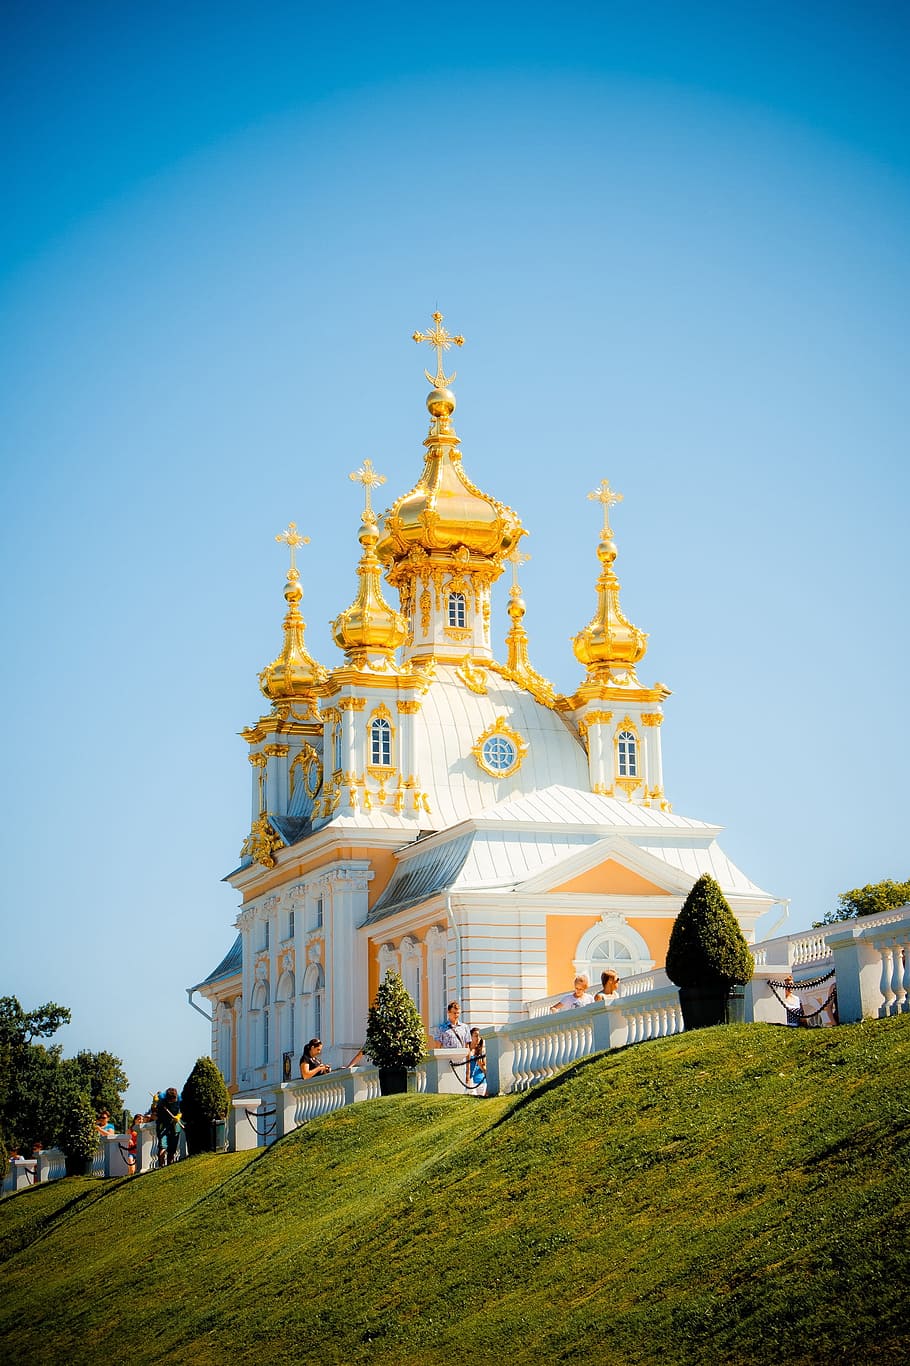 peterhof, church, Peterhof, Church, the church of peter and paul, st petersburg russia, golden dome, orthodoxy, golden domes, vera, temple